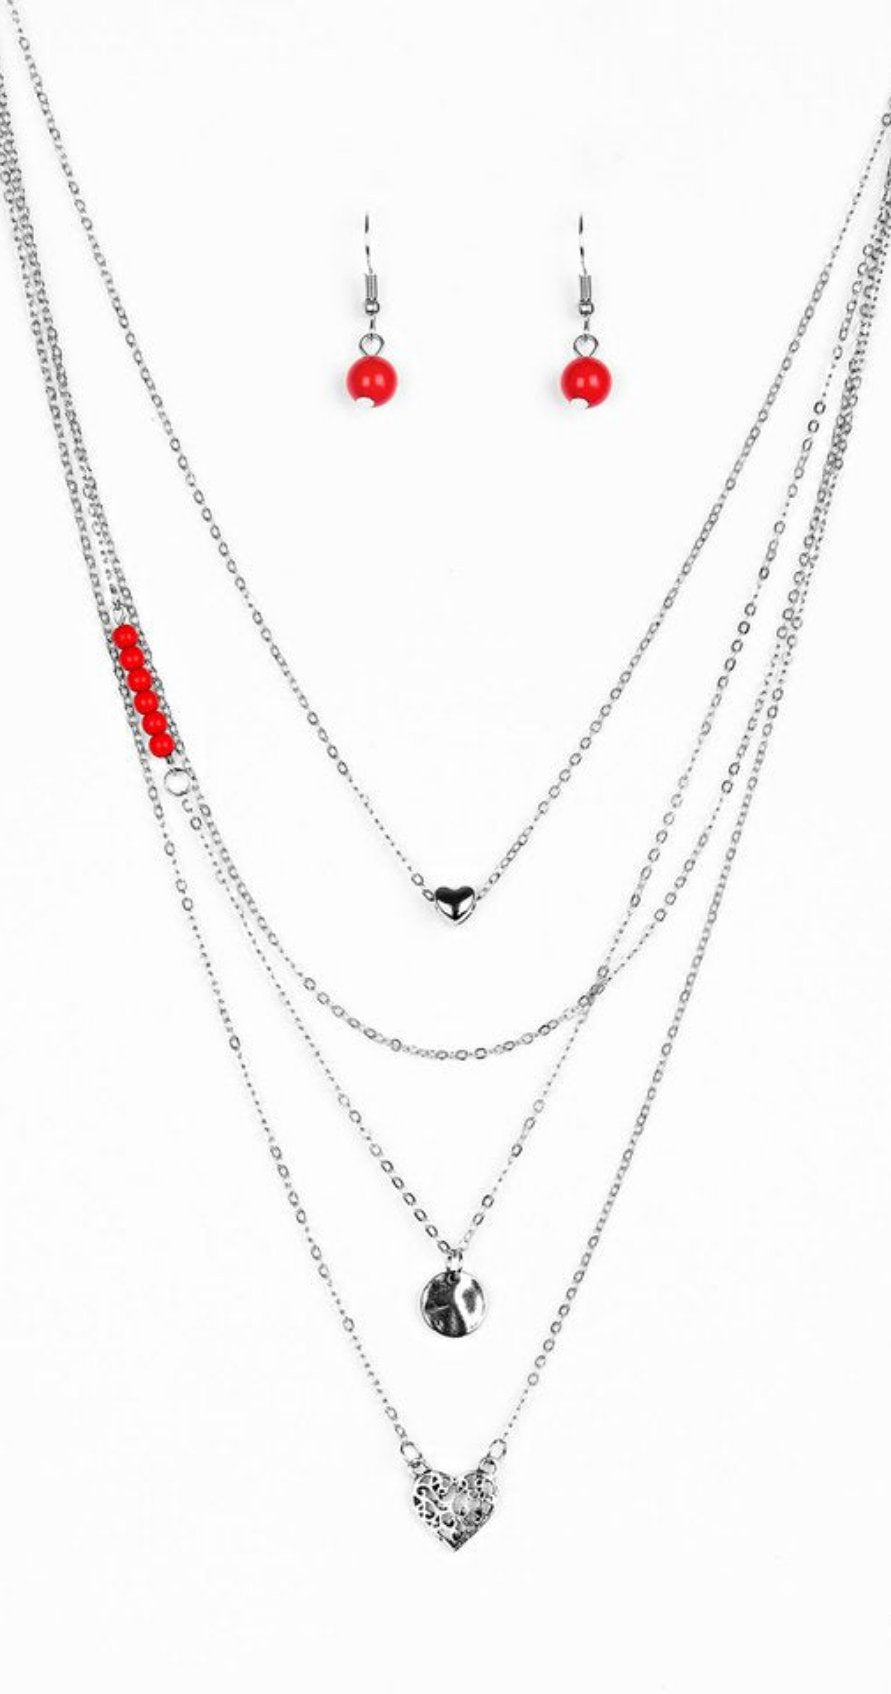 Gypsy Heart Red Necklace and Earrings